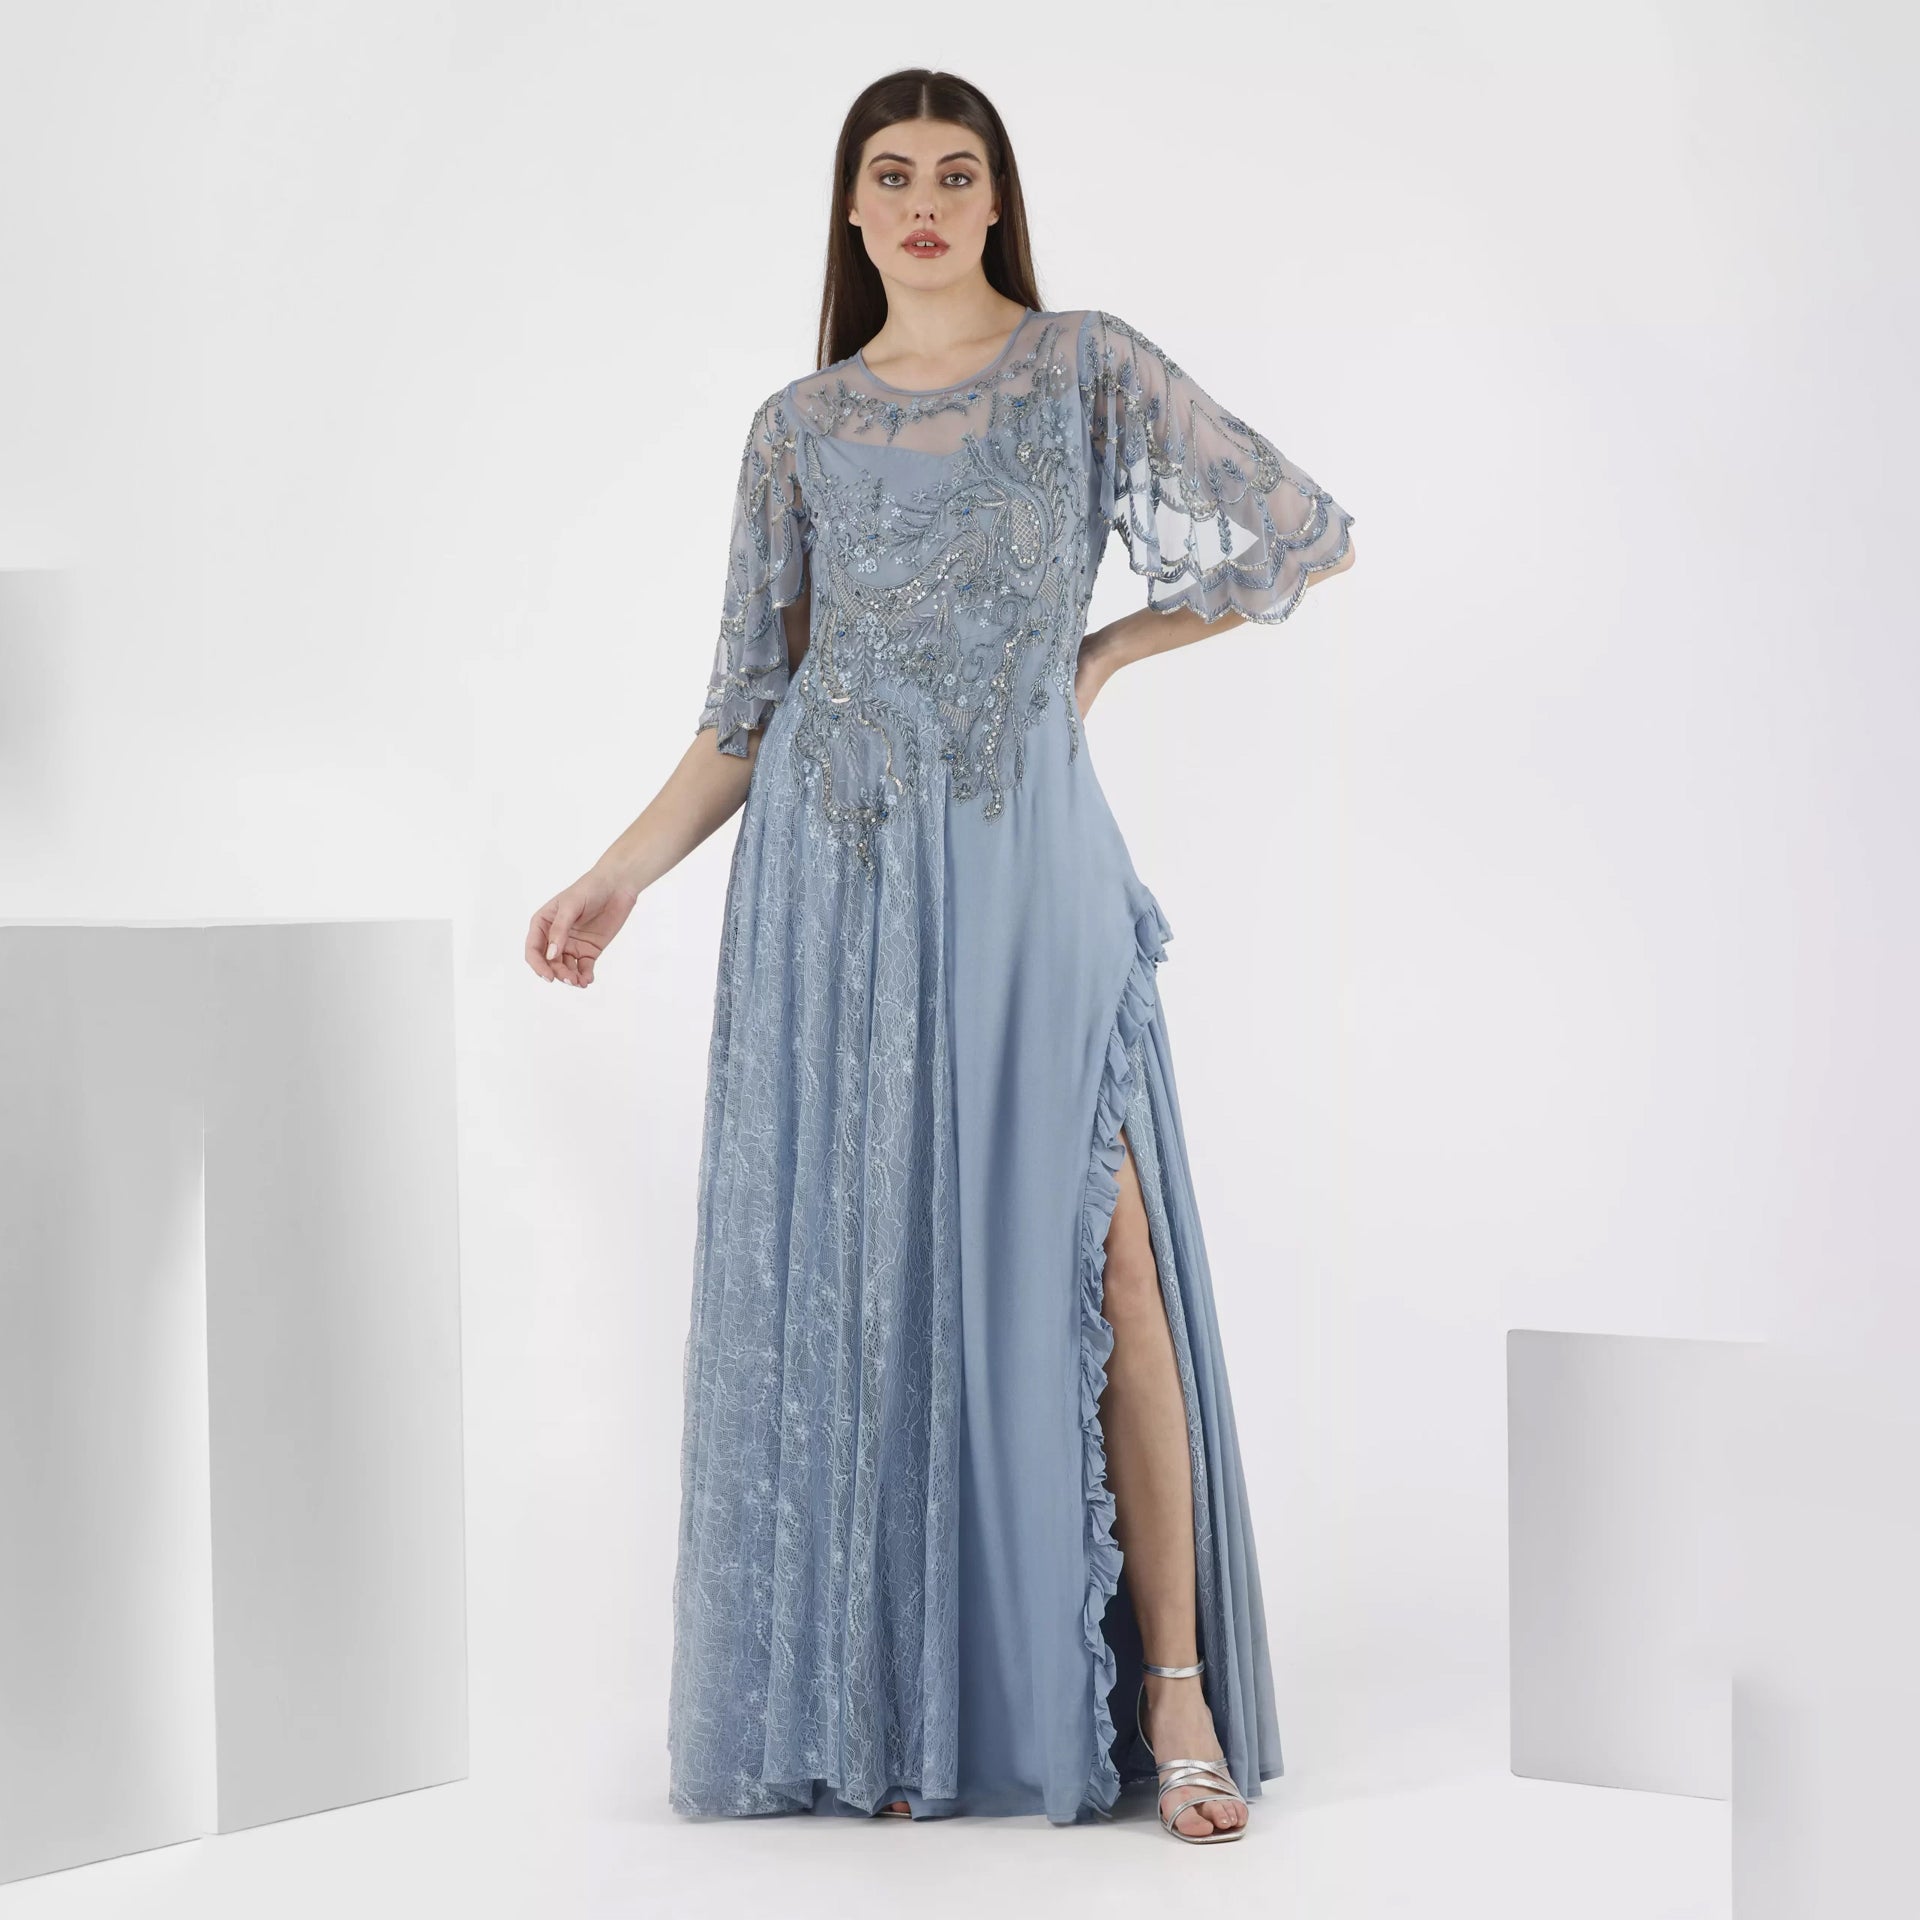 Blue Dress With Short Slevees And Silver Embroidery From Shalky